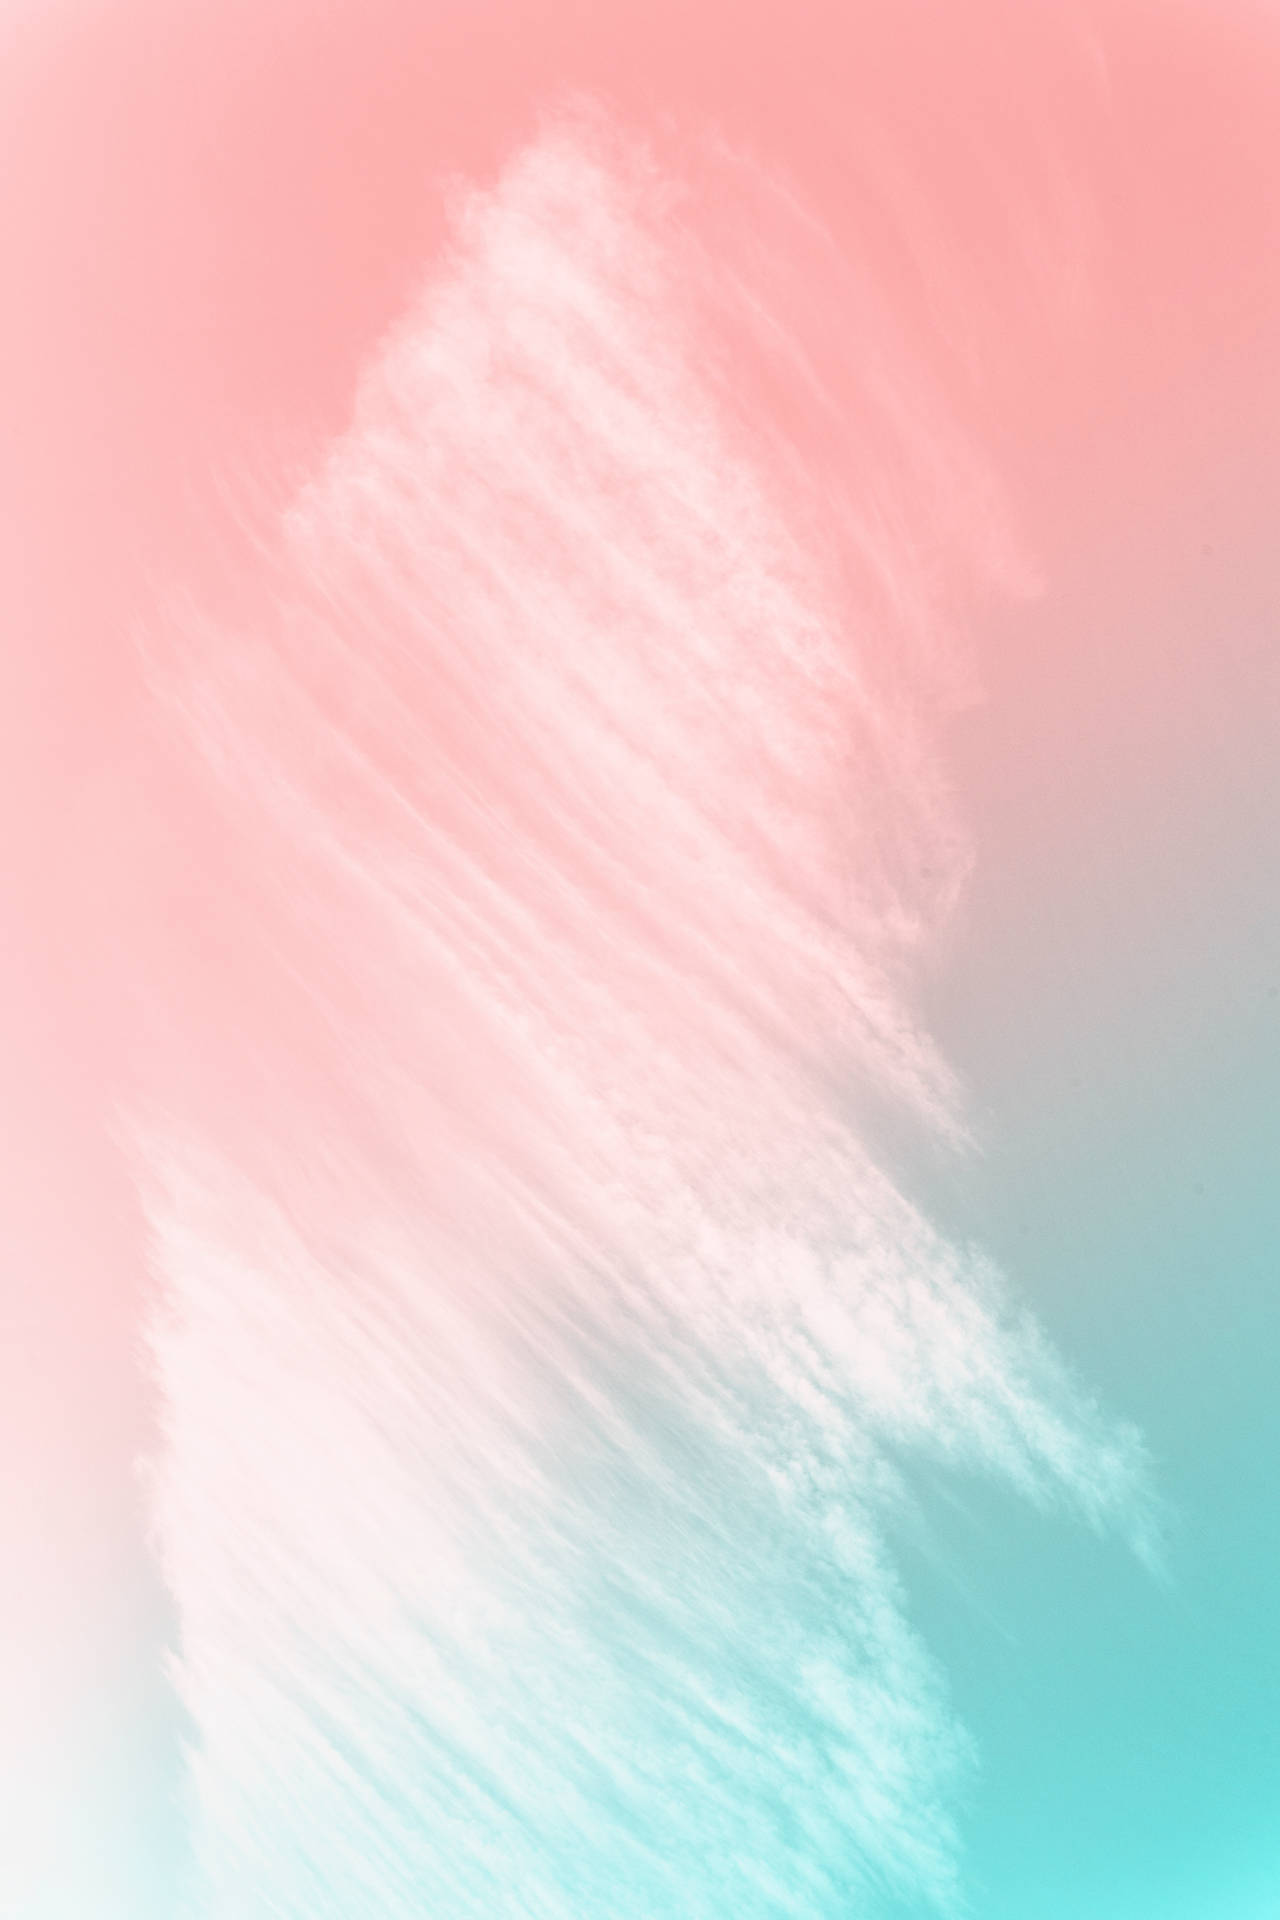 Dive Into Dreamy Hues With A Kawaii Pastel Aesthetic Wallpaper